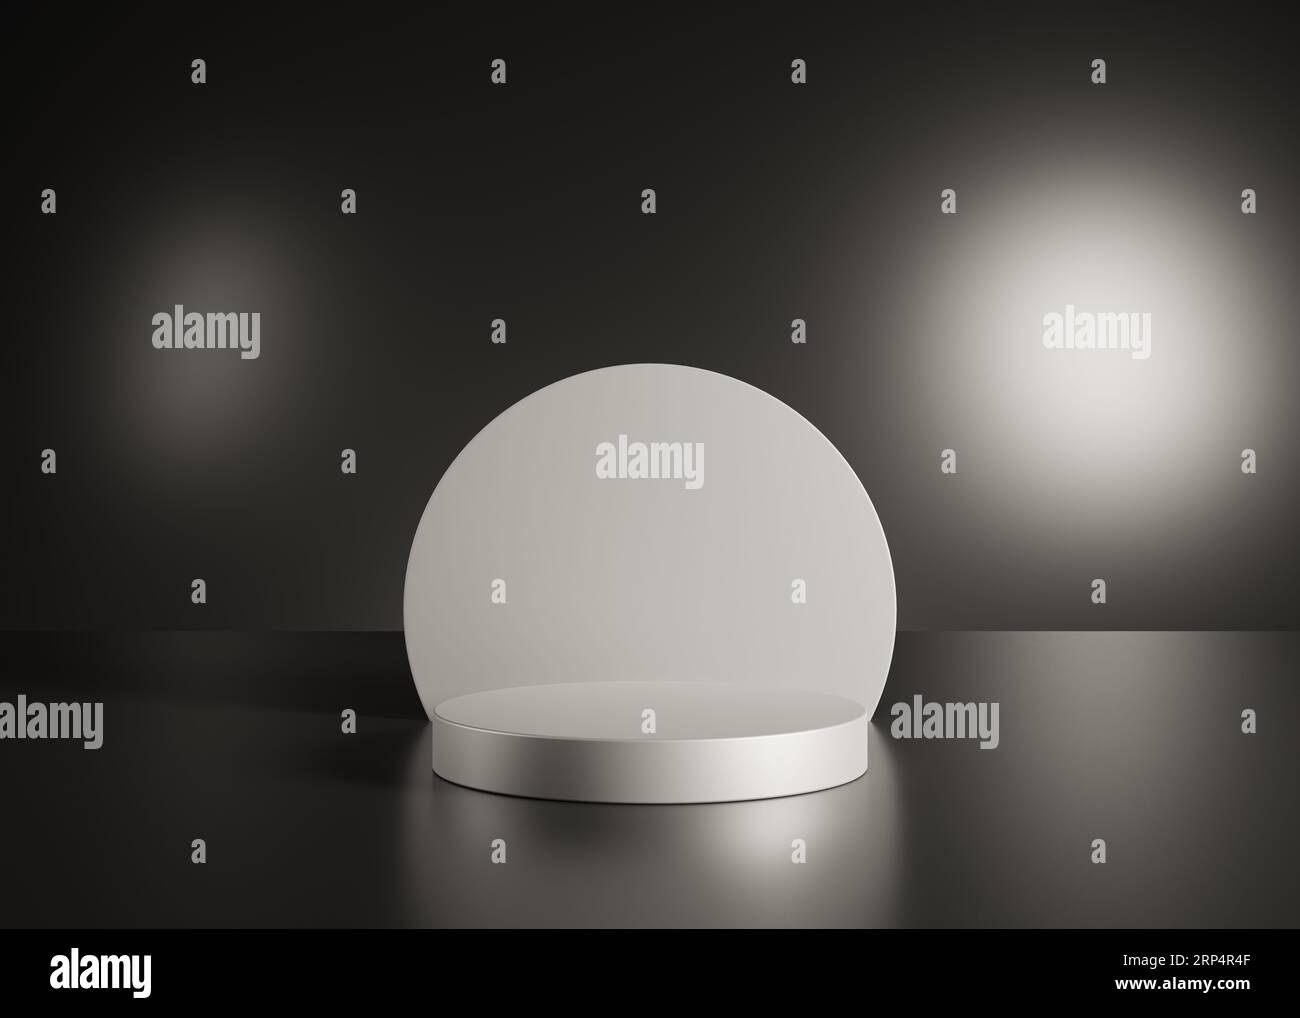 Display stand rotating Stock Vector Images - Alamy